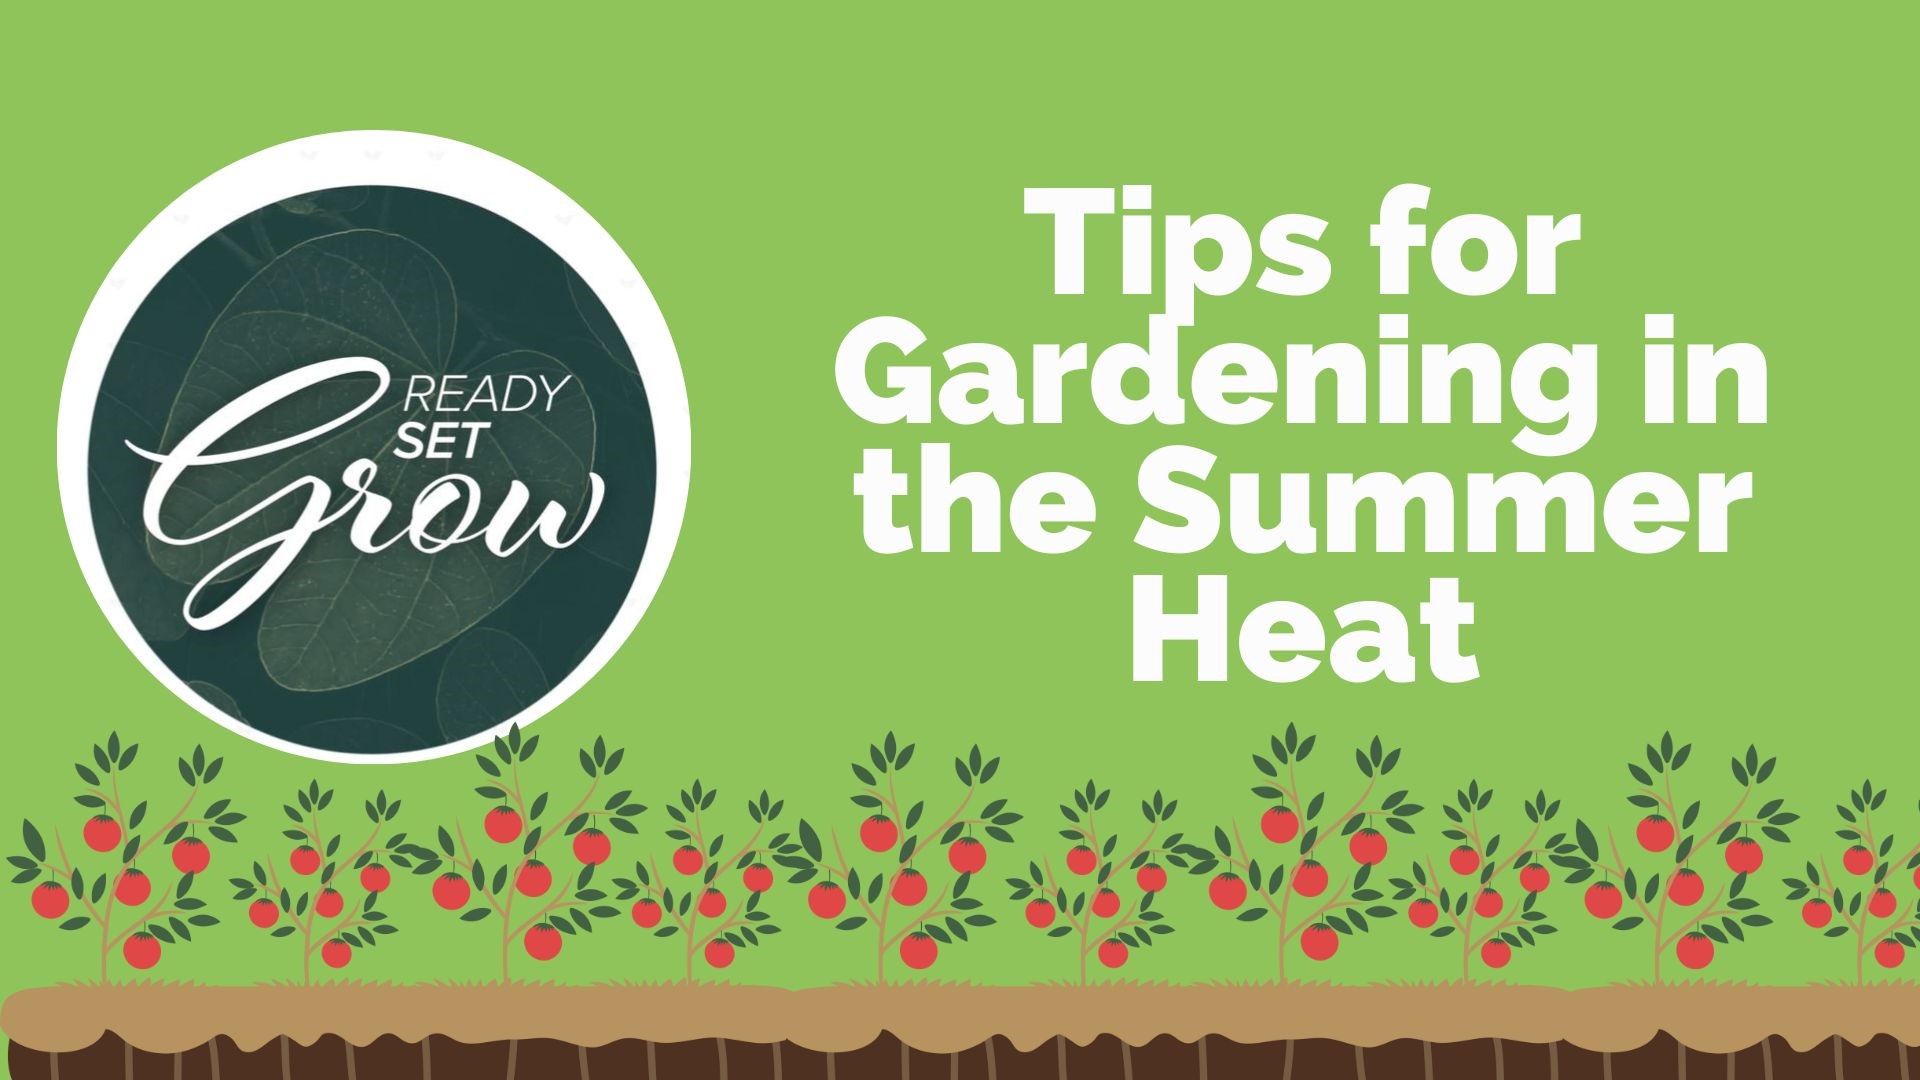 Tips for how to keep your plants thriving in the summer heat. From what seeds you can plant now to best watering practices. Plus, ways you can prepare for fall.